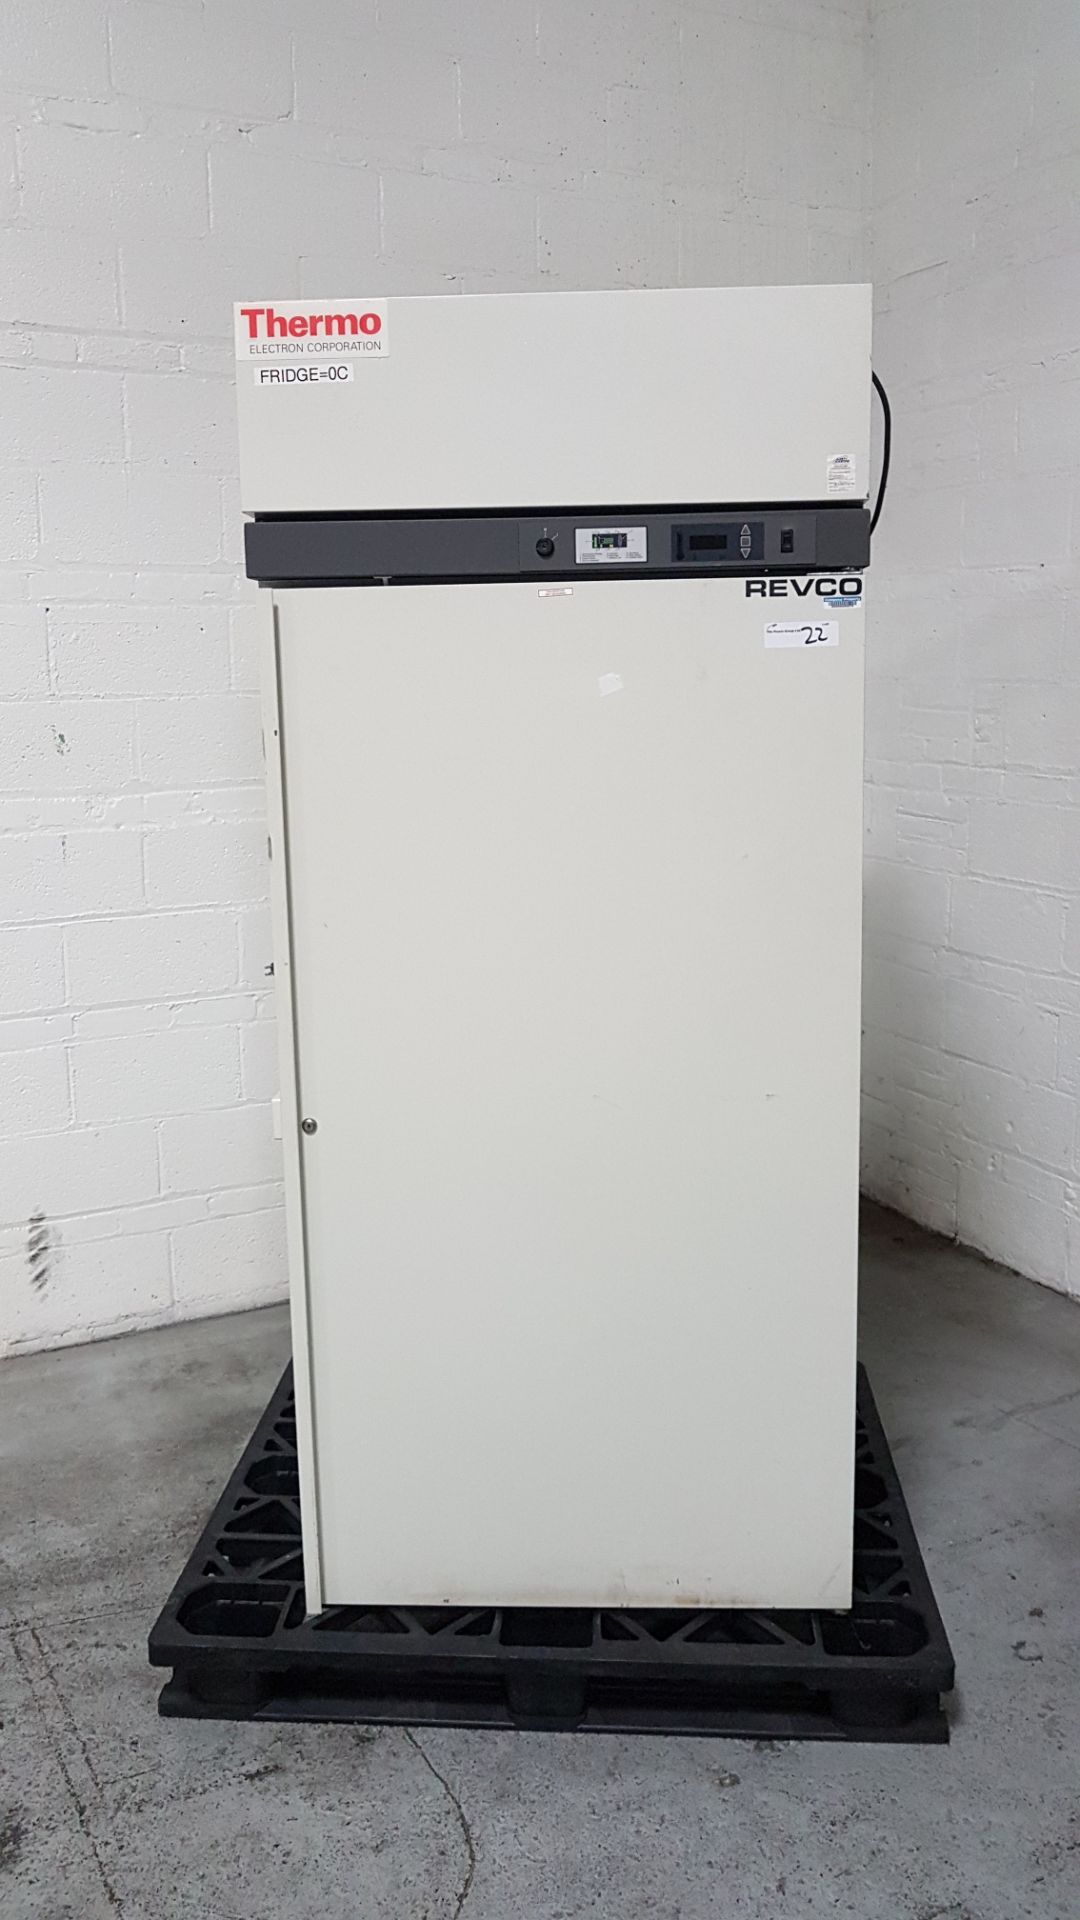 Thermo Electron freezer, model REL3004A21, 29" W x 26" D x 52"H chamber, 115 volts.